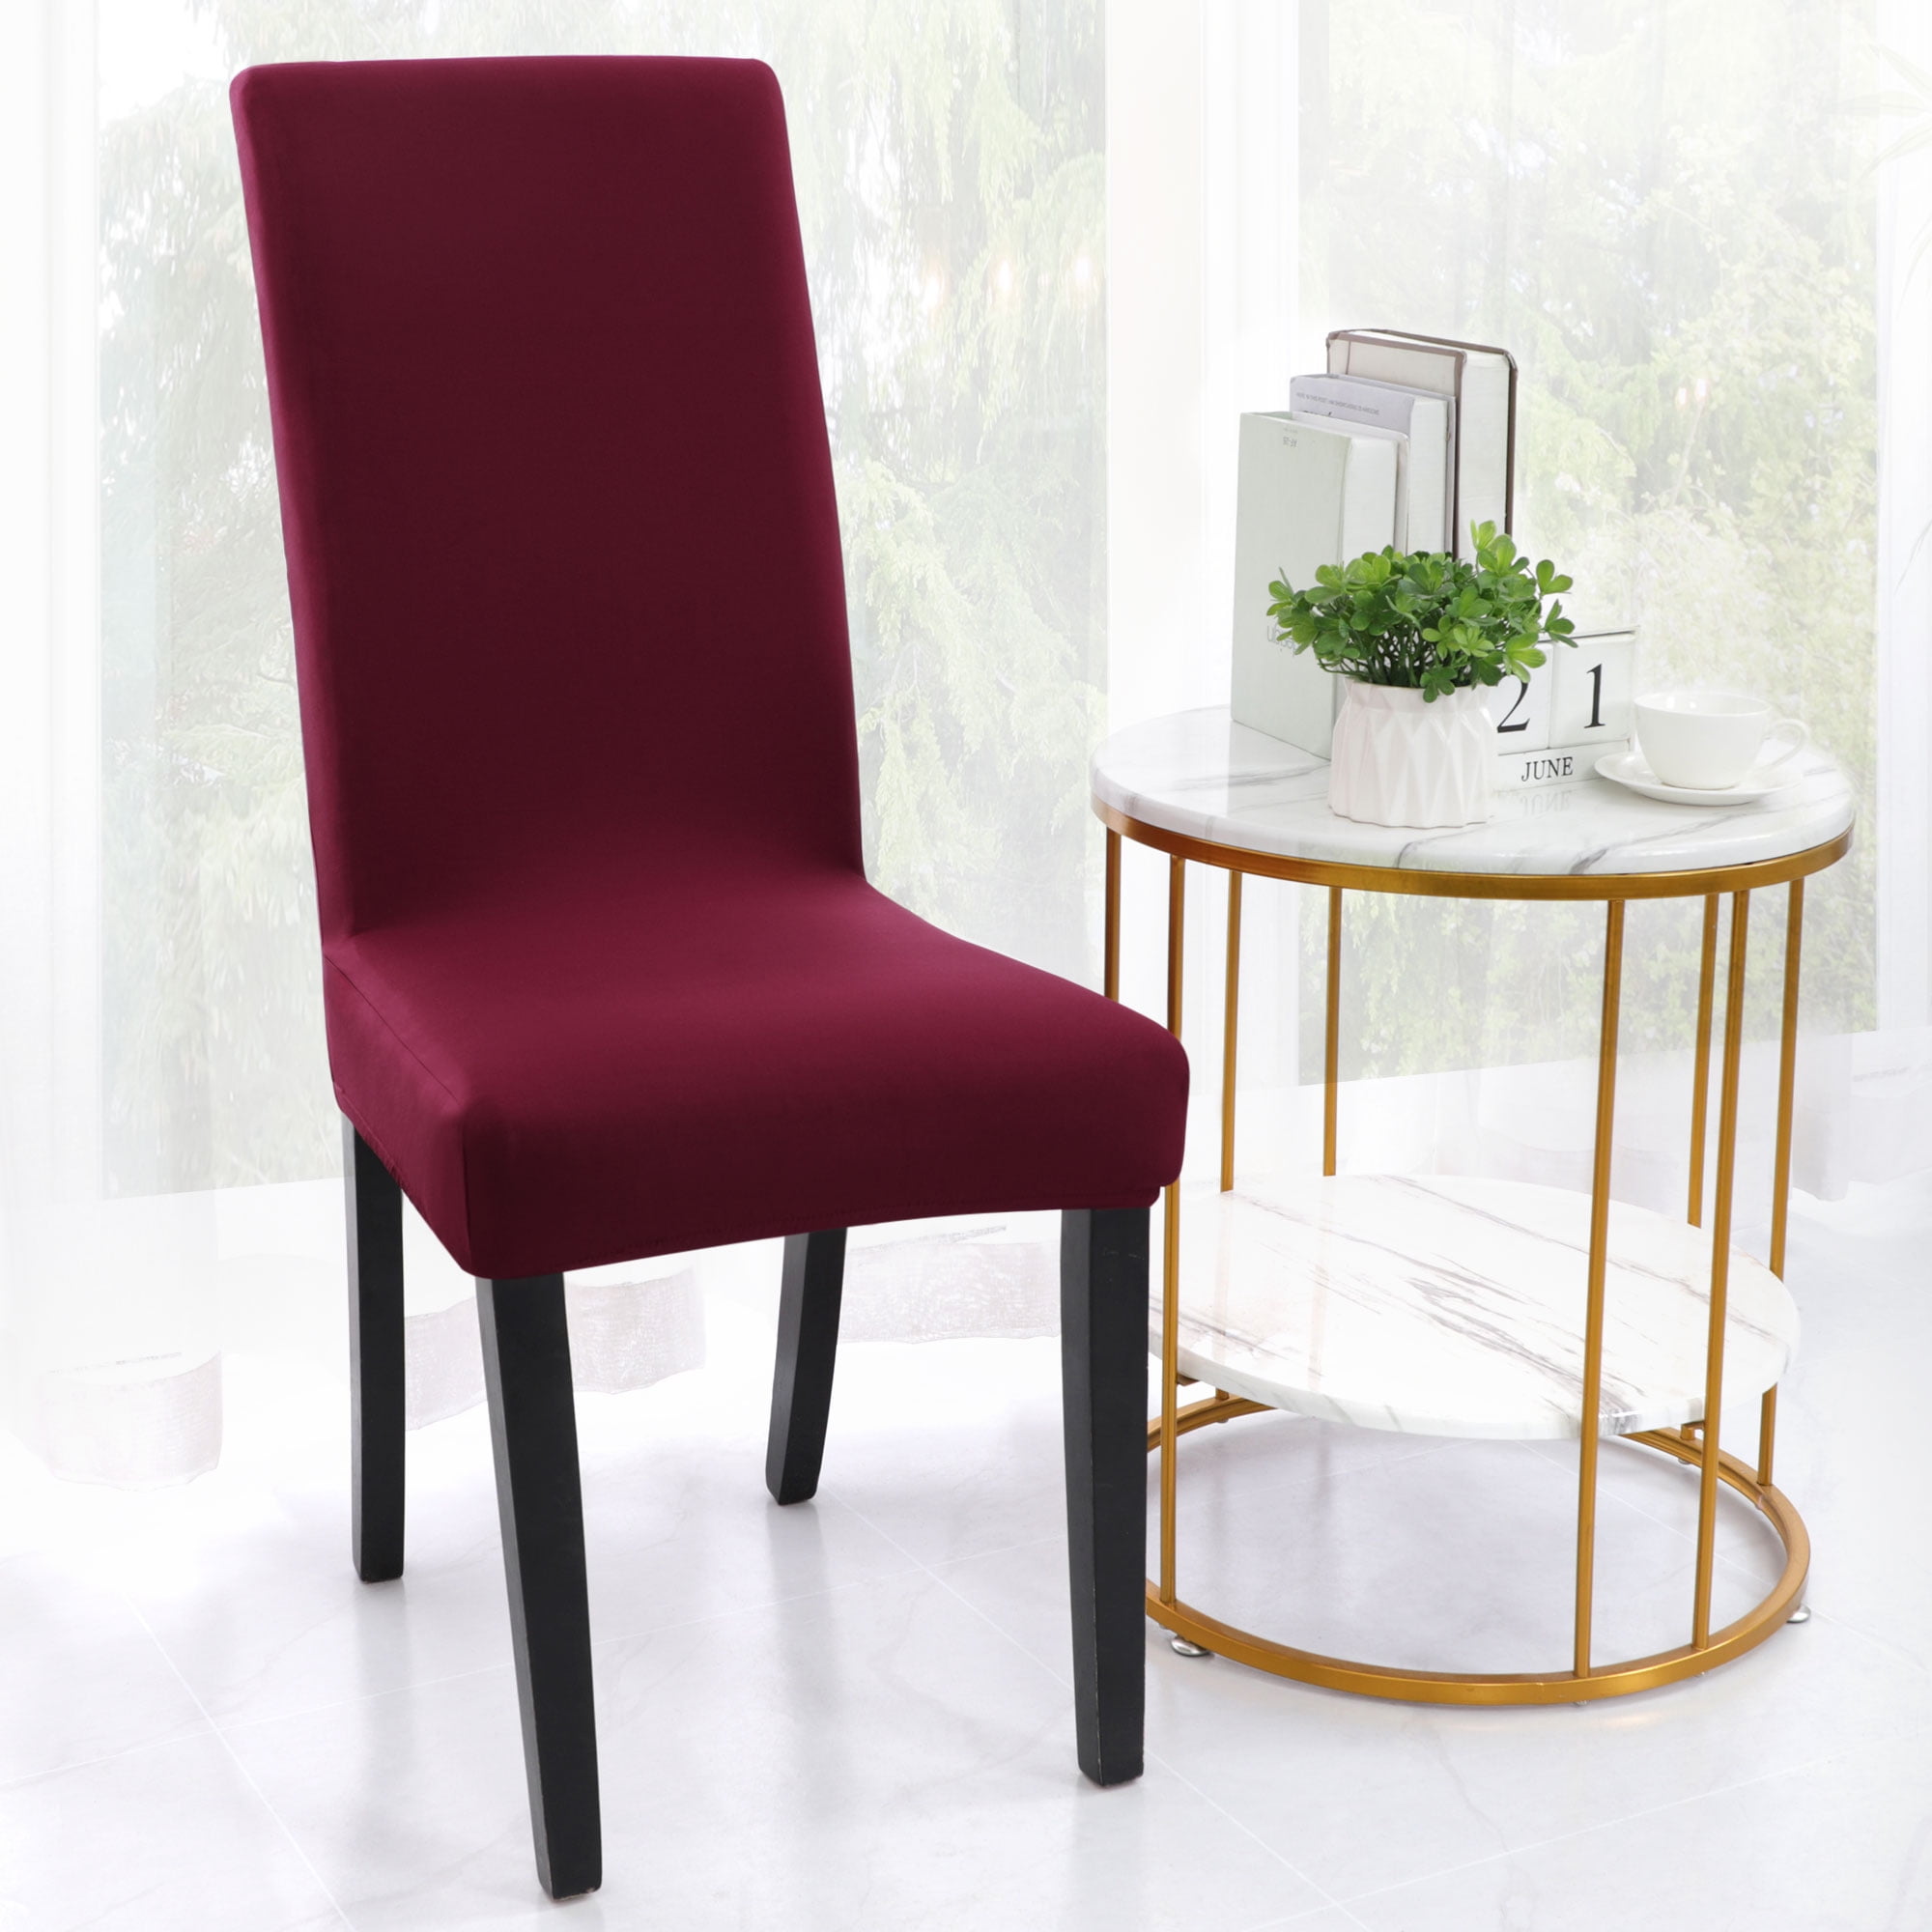 Details about   Pub Stool Chair Covers Short Low Back Dining Chair Slipcovers Velvet Stretch 